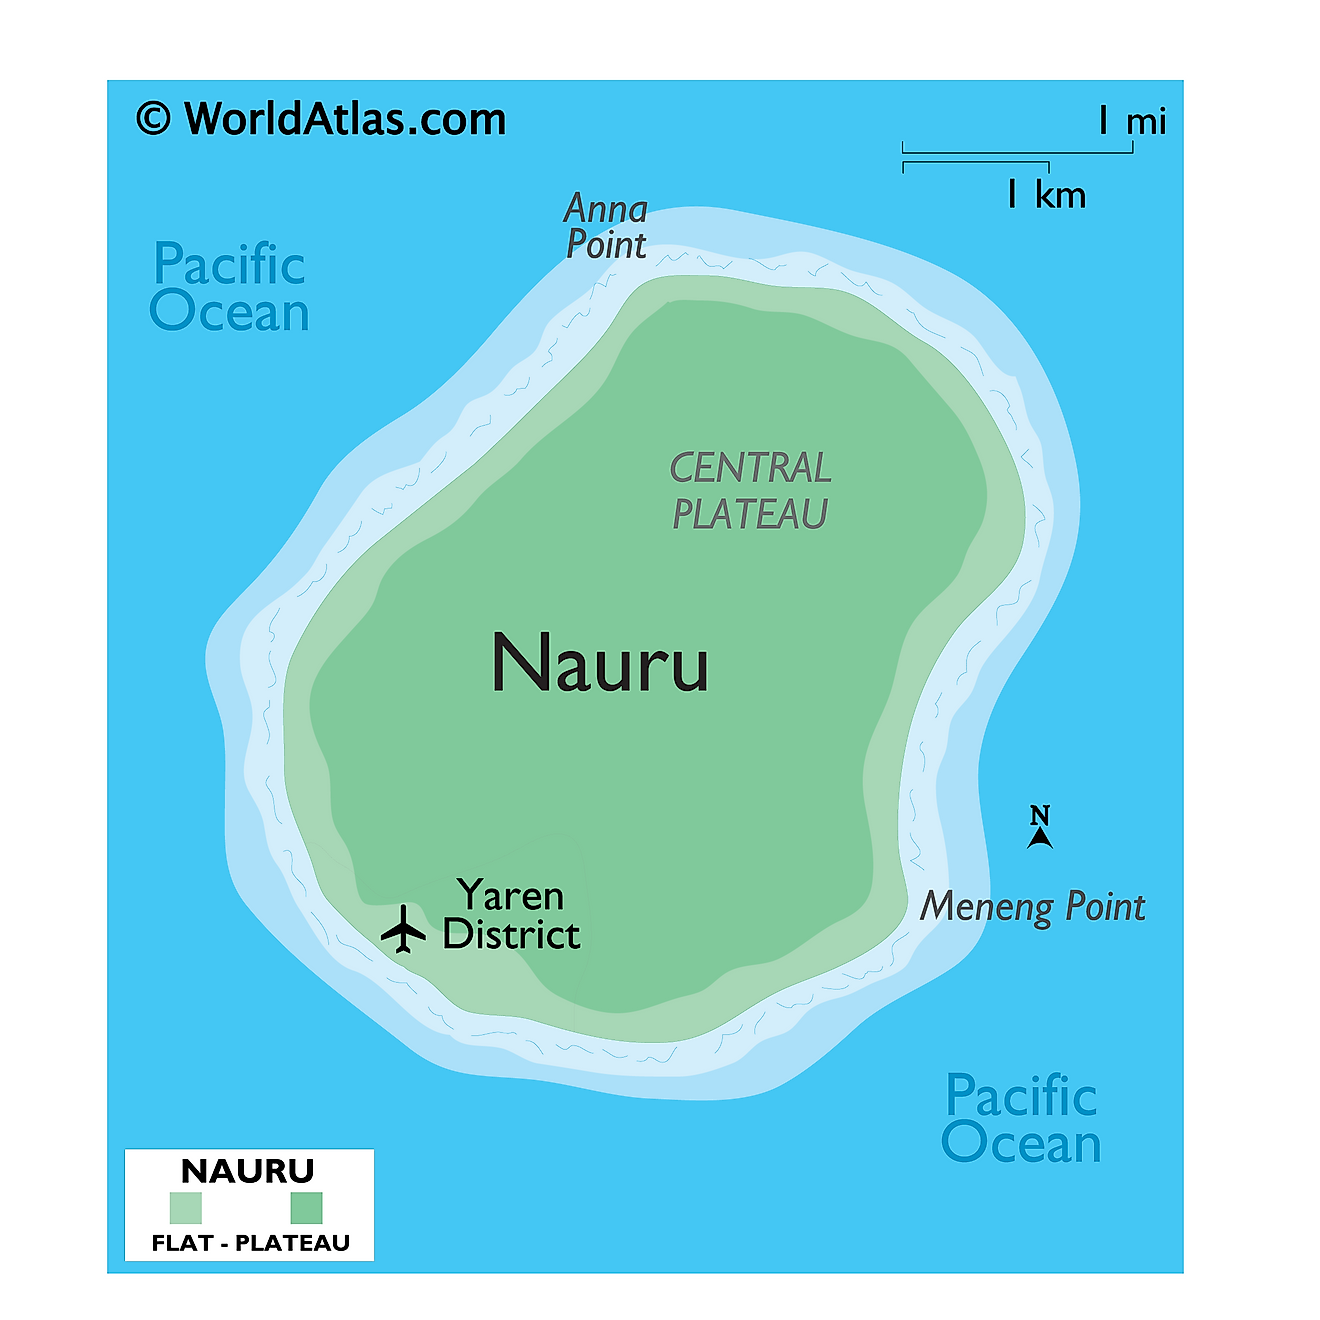 Physical Map of Nauru showing its relief, Central Plateau, important points, and surrounding Pacific Ocean.